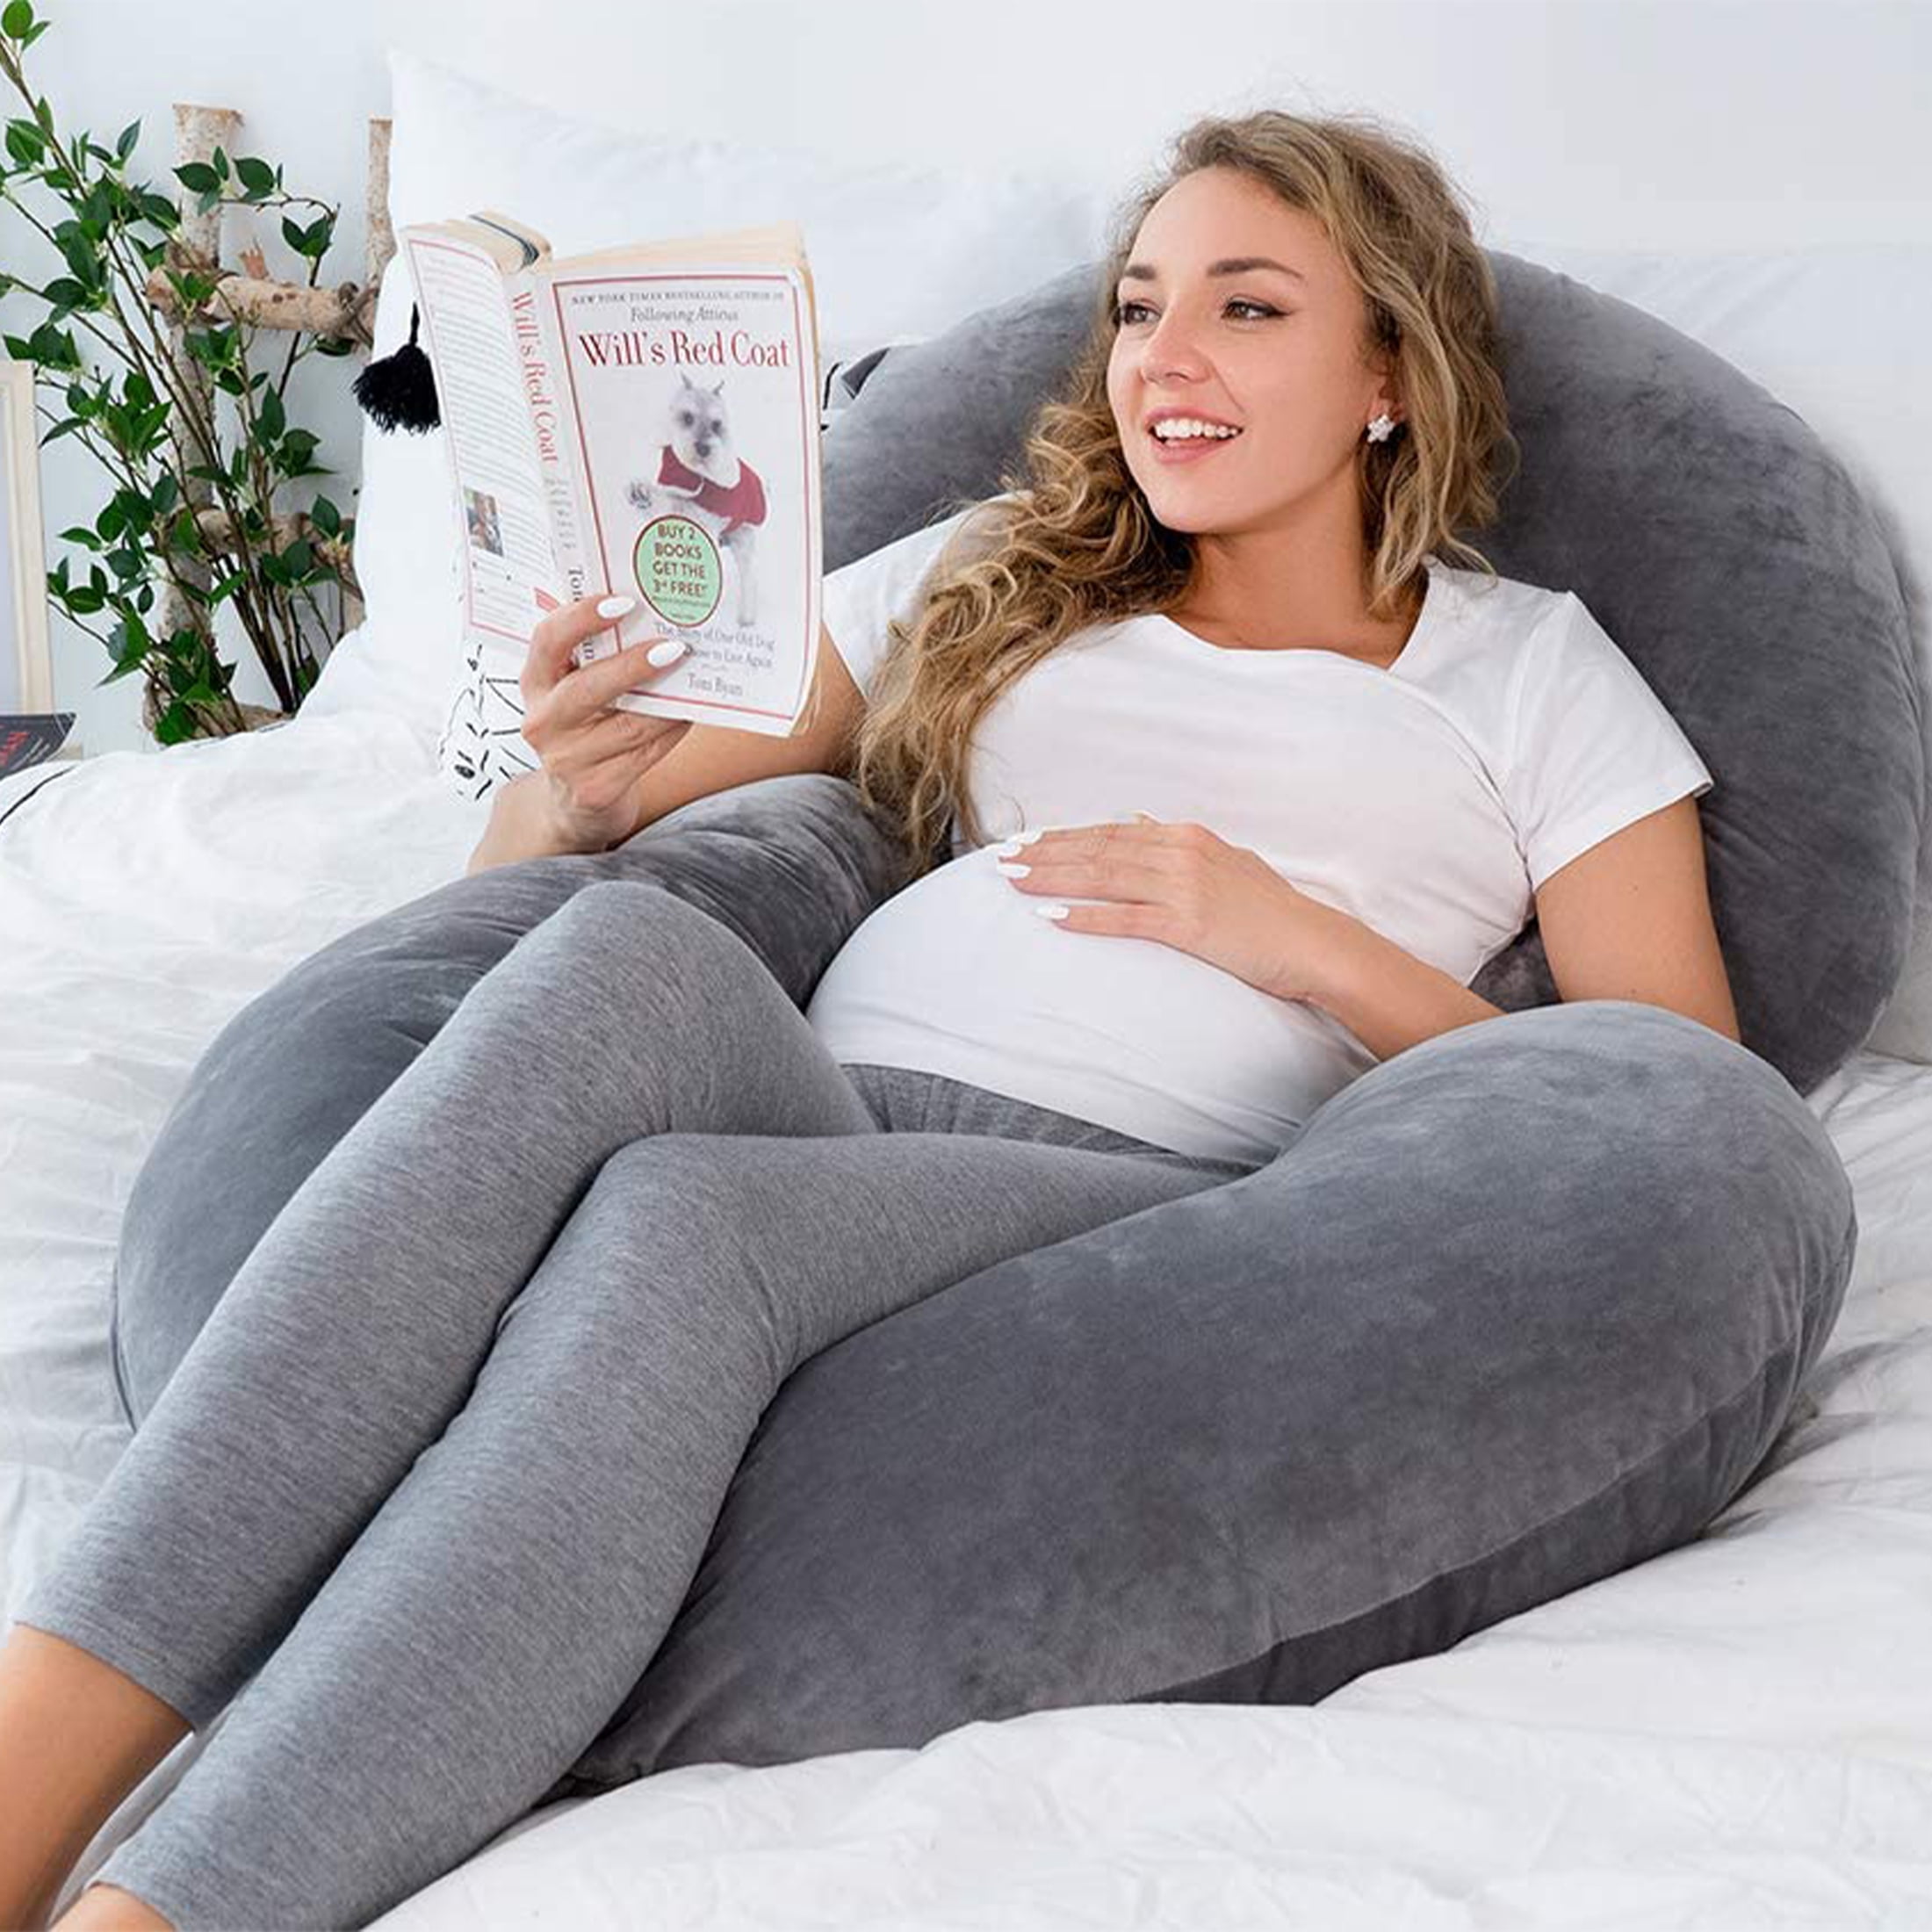 QUEEN ROSE Pregnancy Pillow with Velvet Cover-Maternity Body Pillow U  Shaped for